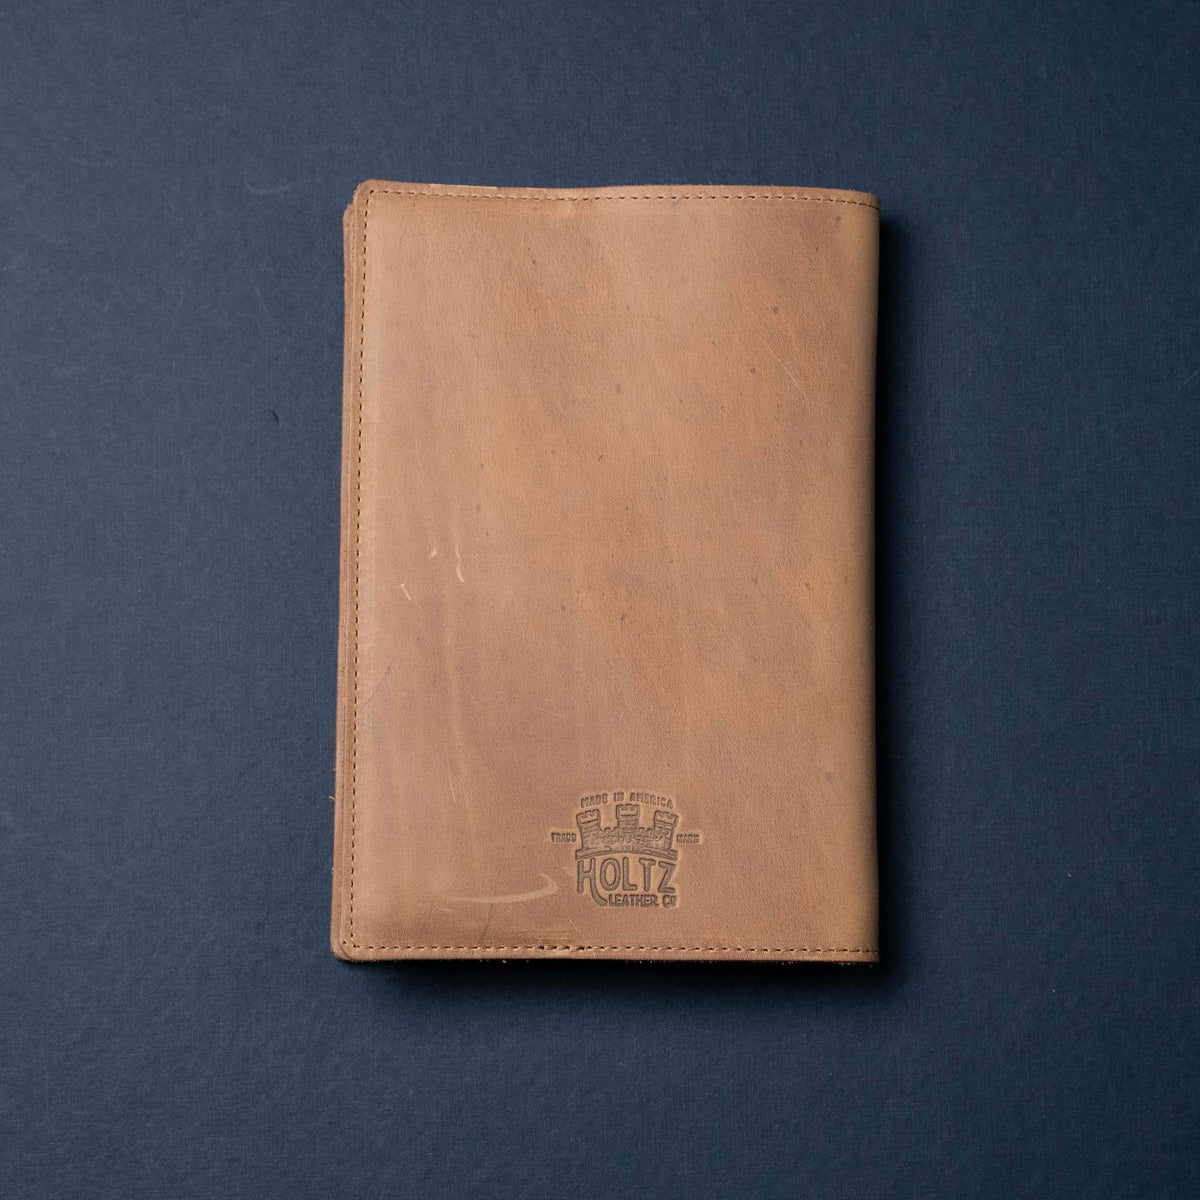 Stone Cowhide - A5 Leather Journal - Personalized High Character (One-Of-A-Kind) Notebooks - 192 pages 8.75” x 6.25”